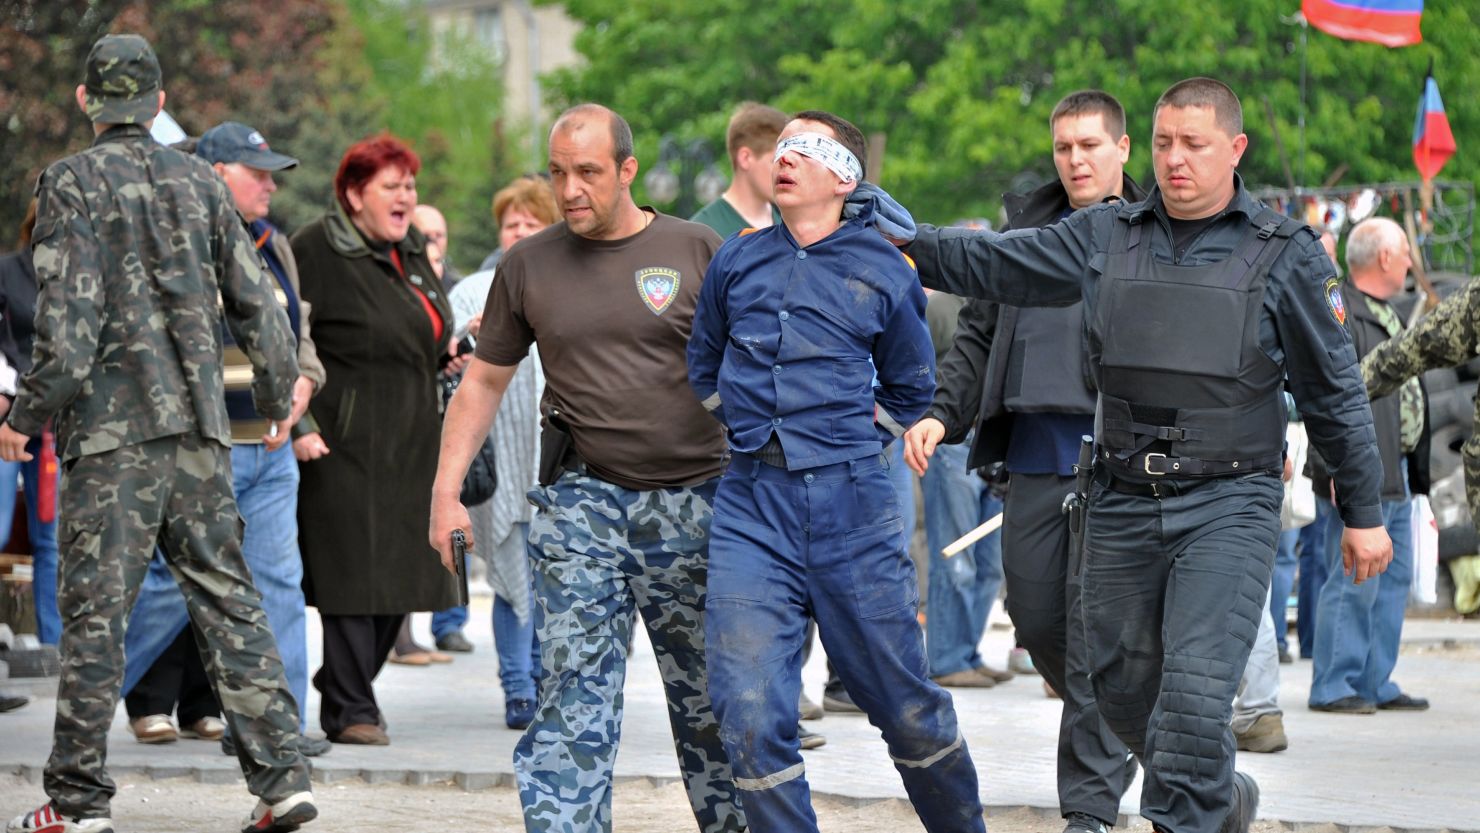 Pro-Russian militants take away a man outside the regional state building they seized in Donetsk on May 5, 2014. 